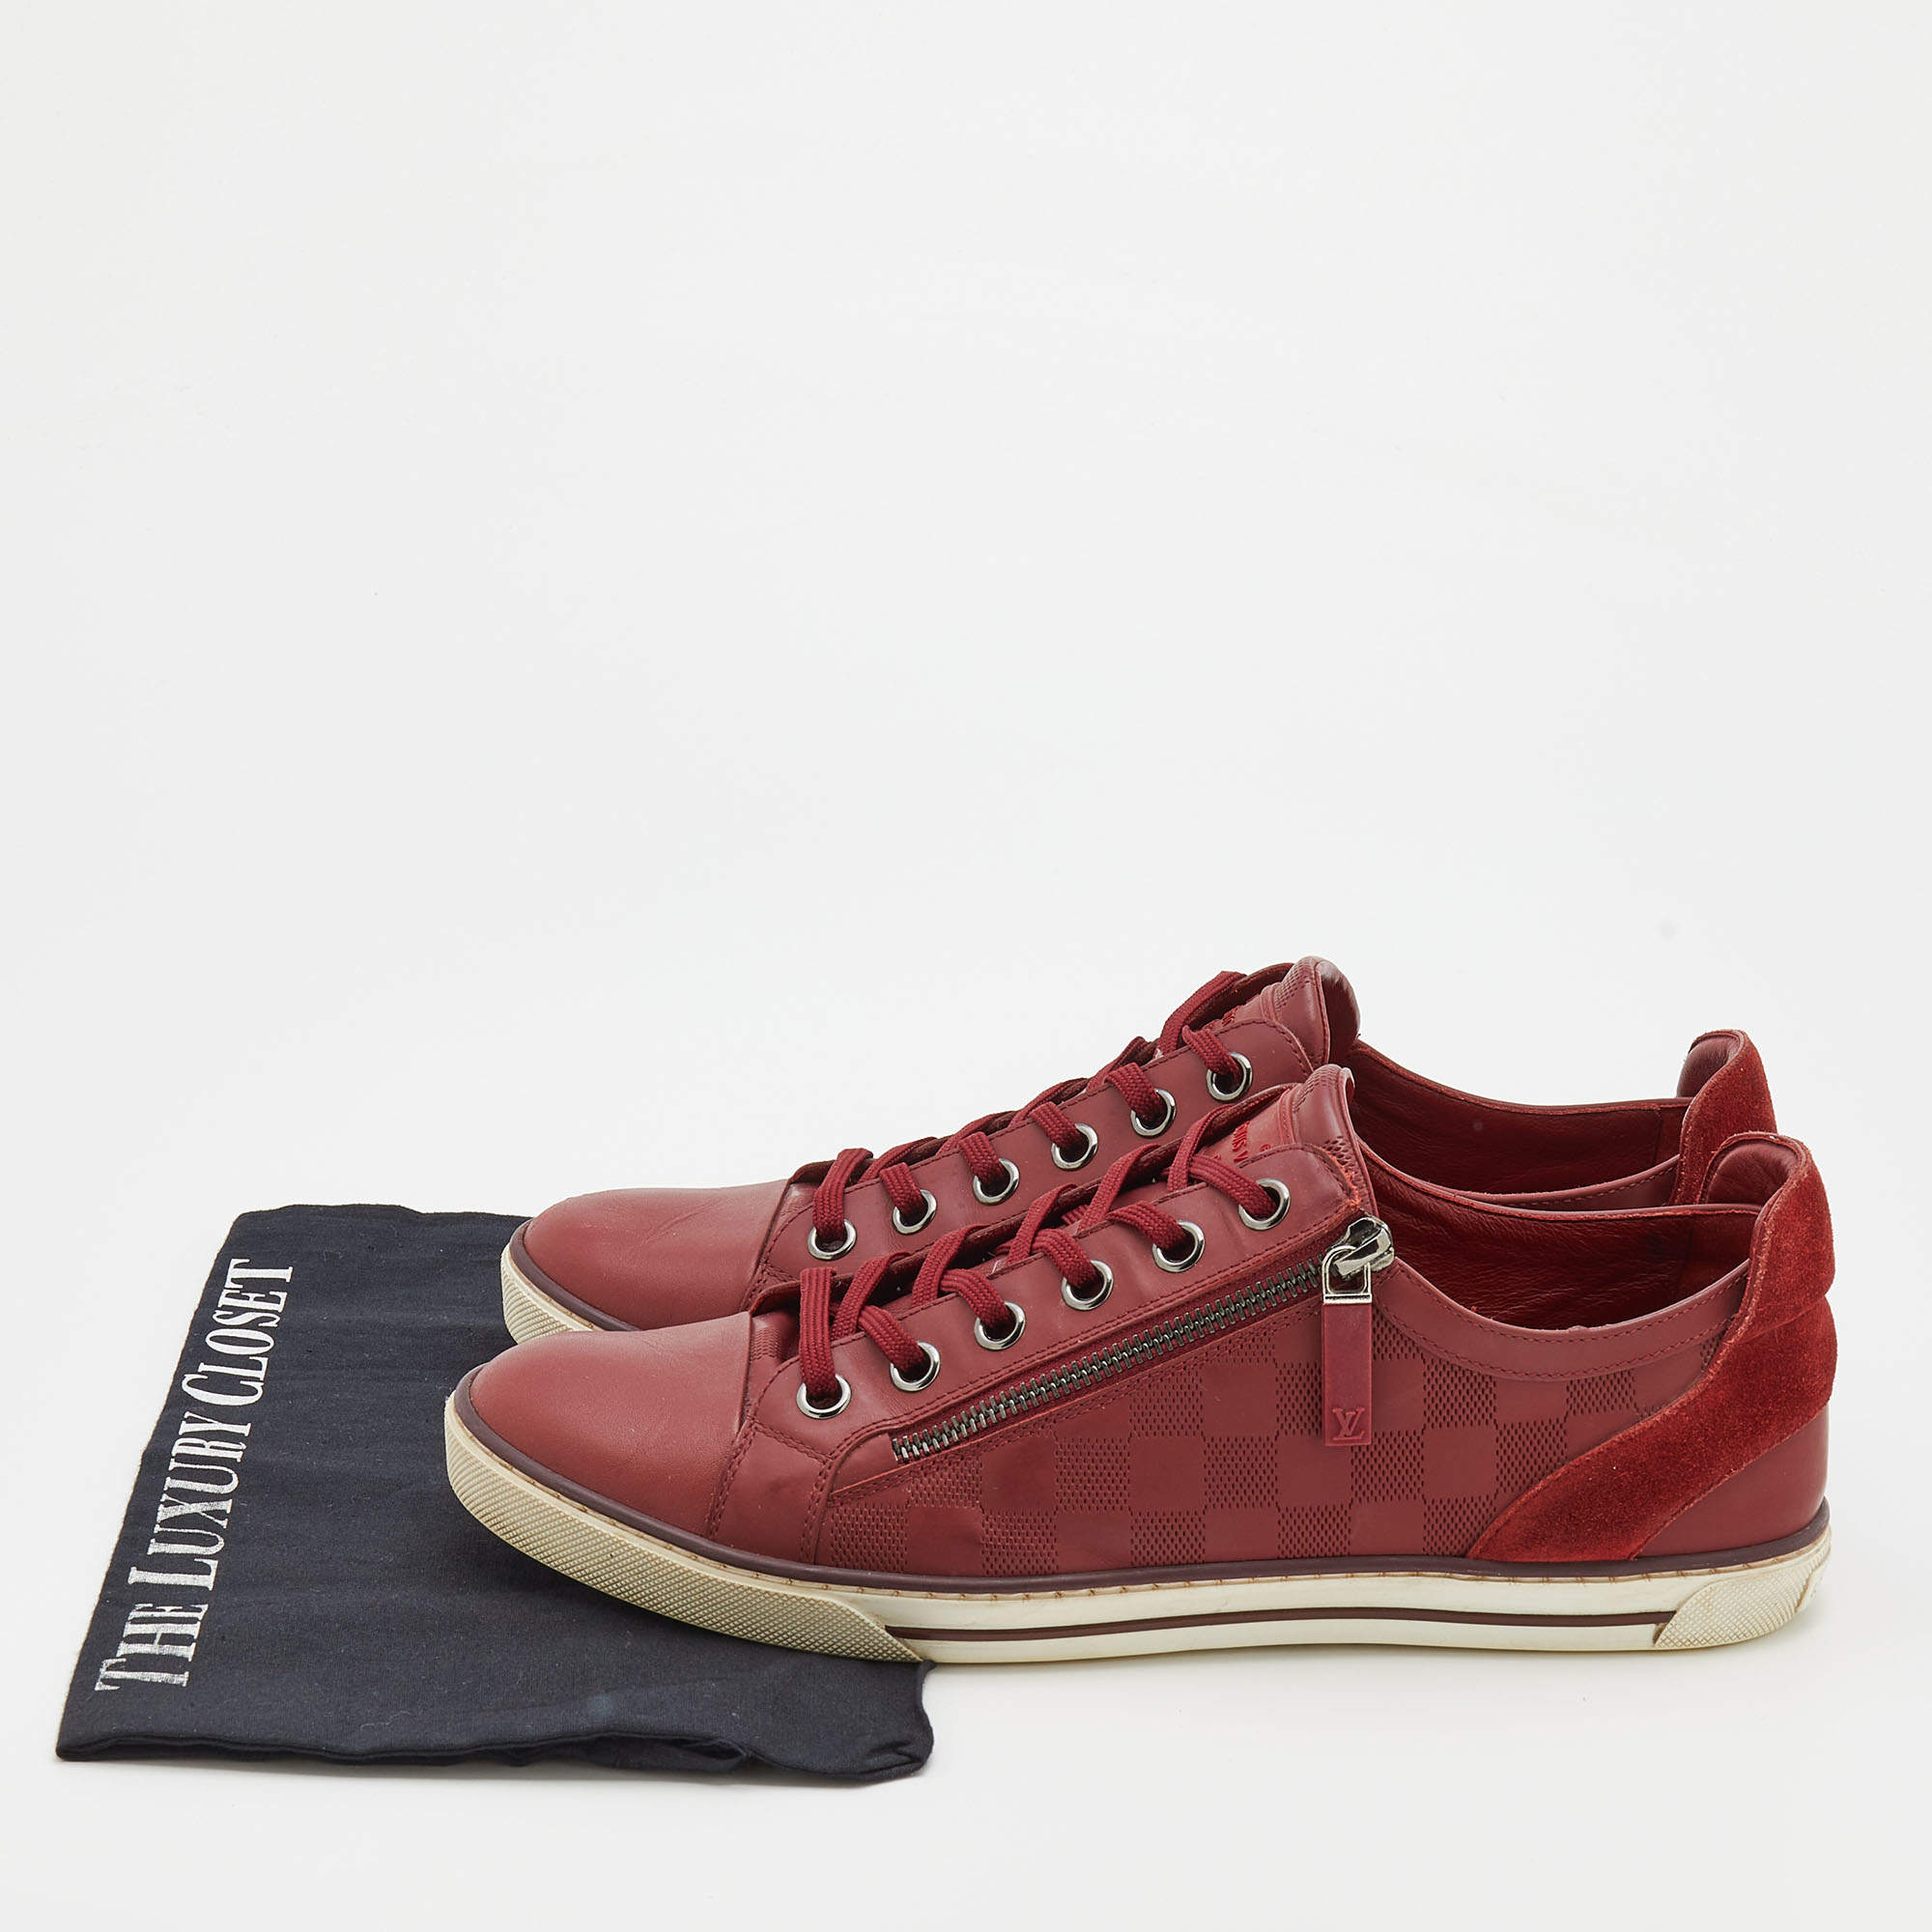 Men's Louis Vuitton low top tennis shoes,red lamb leather and suade.